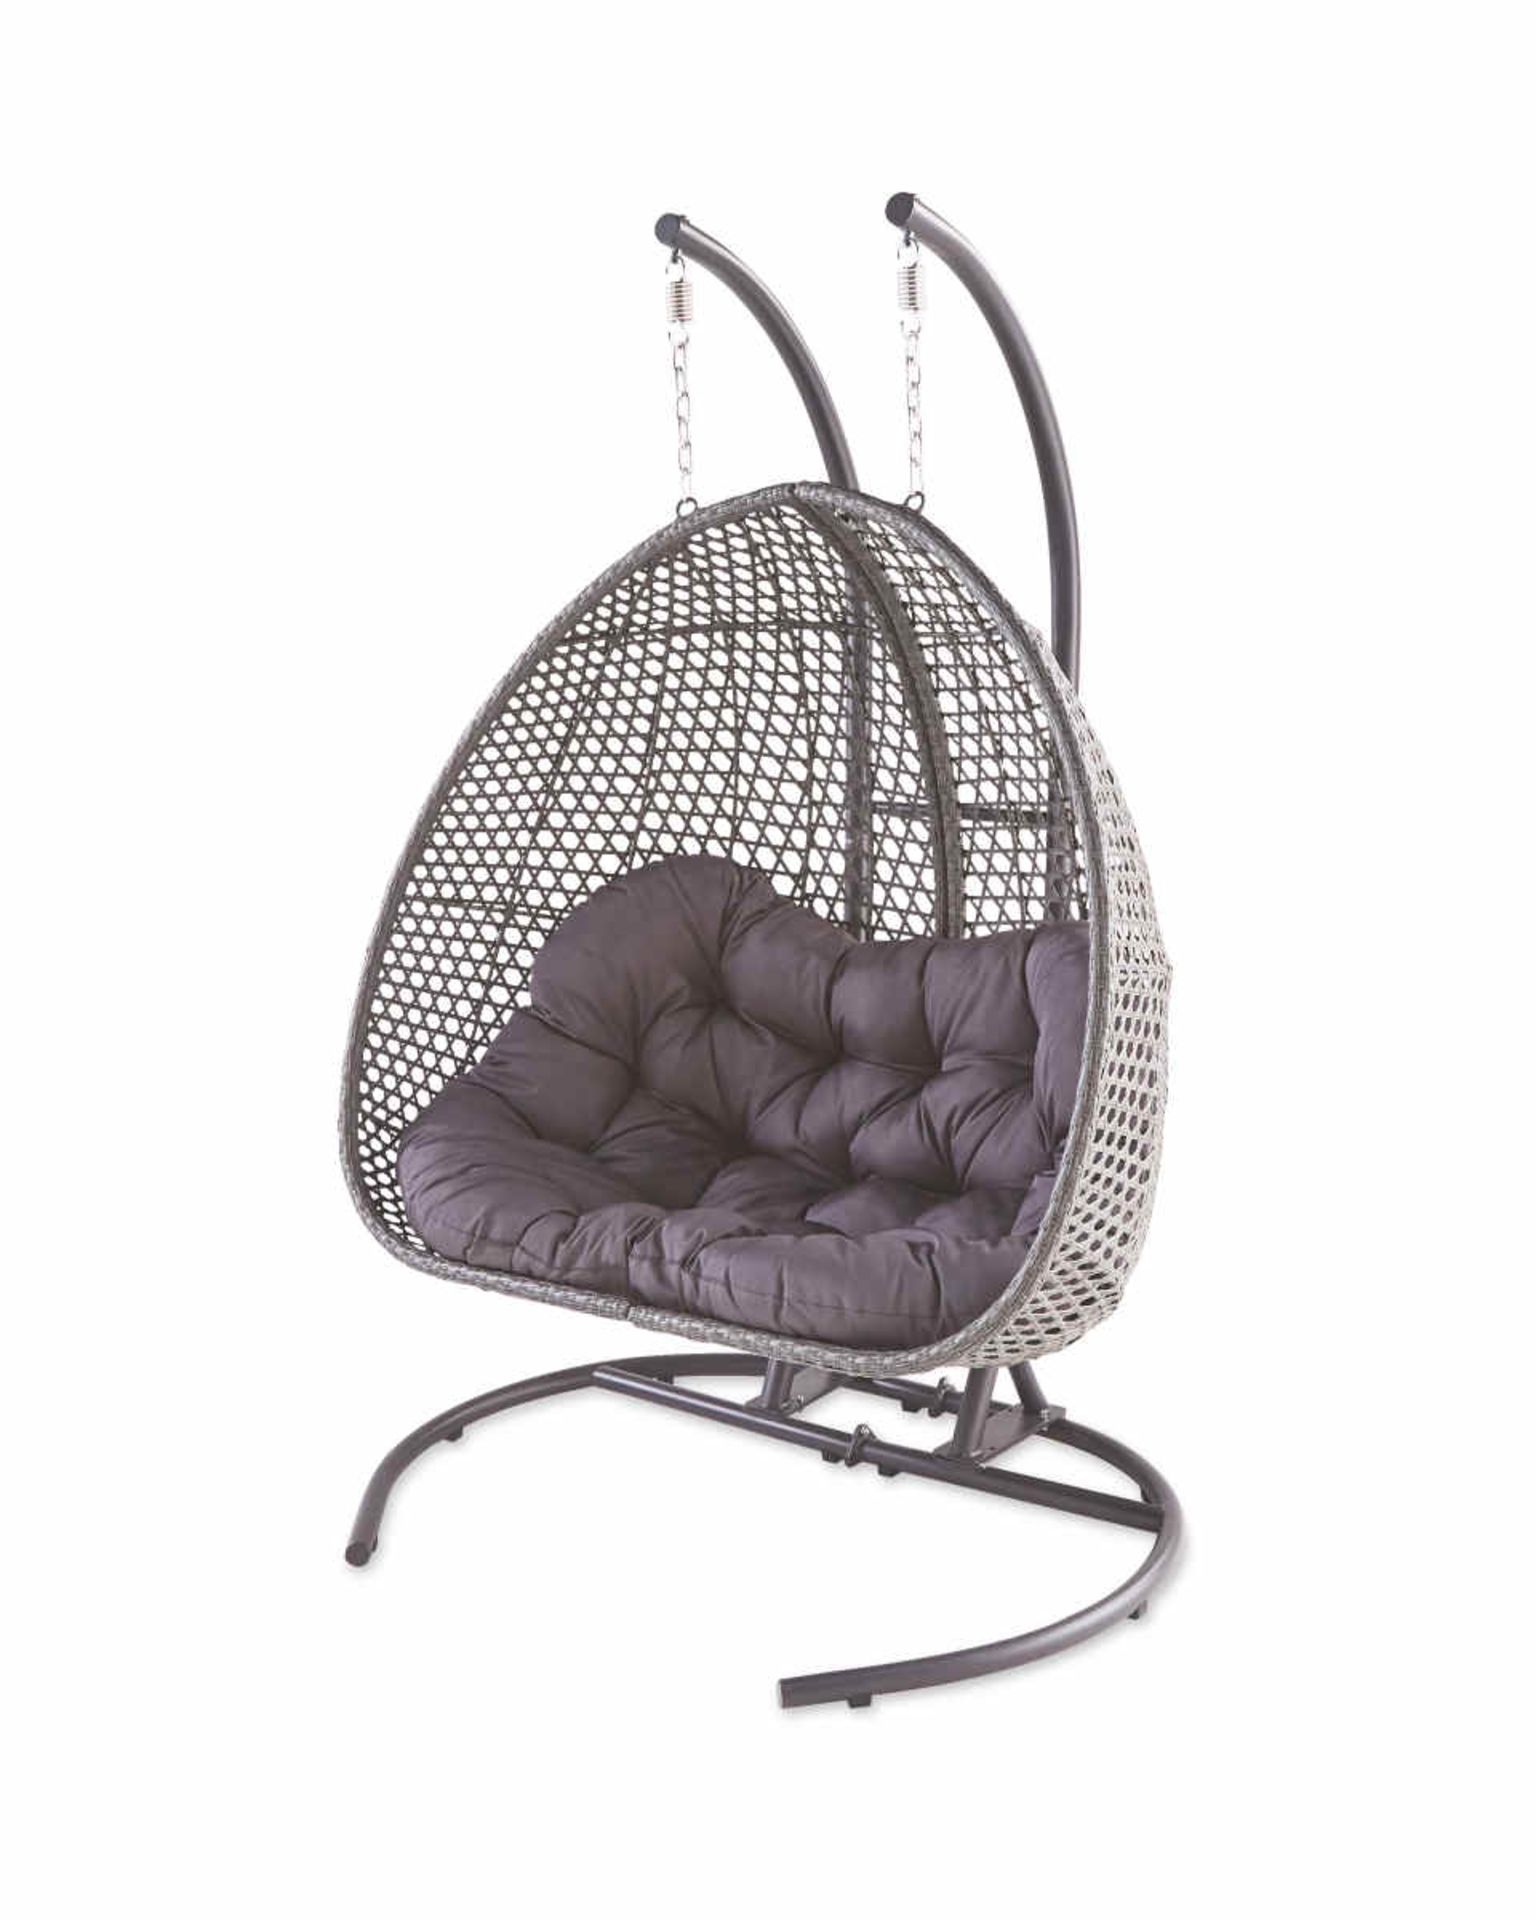 Large Hanging Egg Chair. - H/ST. This amazing Large Hanging Egg Chair is the ideal way to relax in